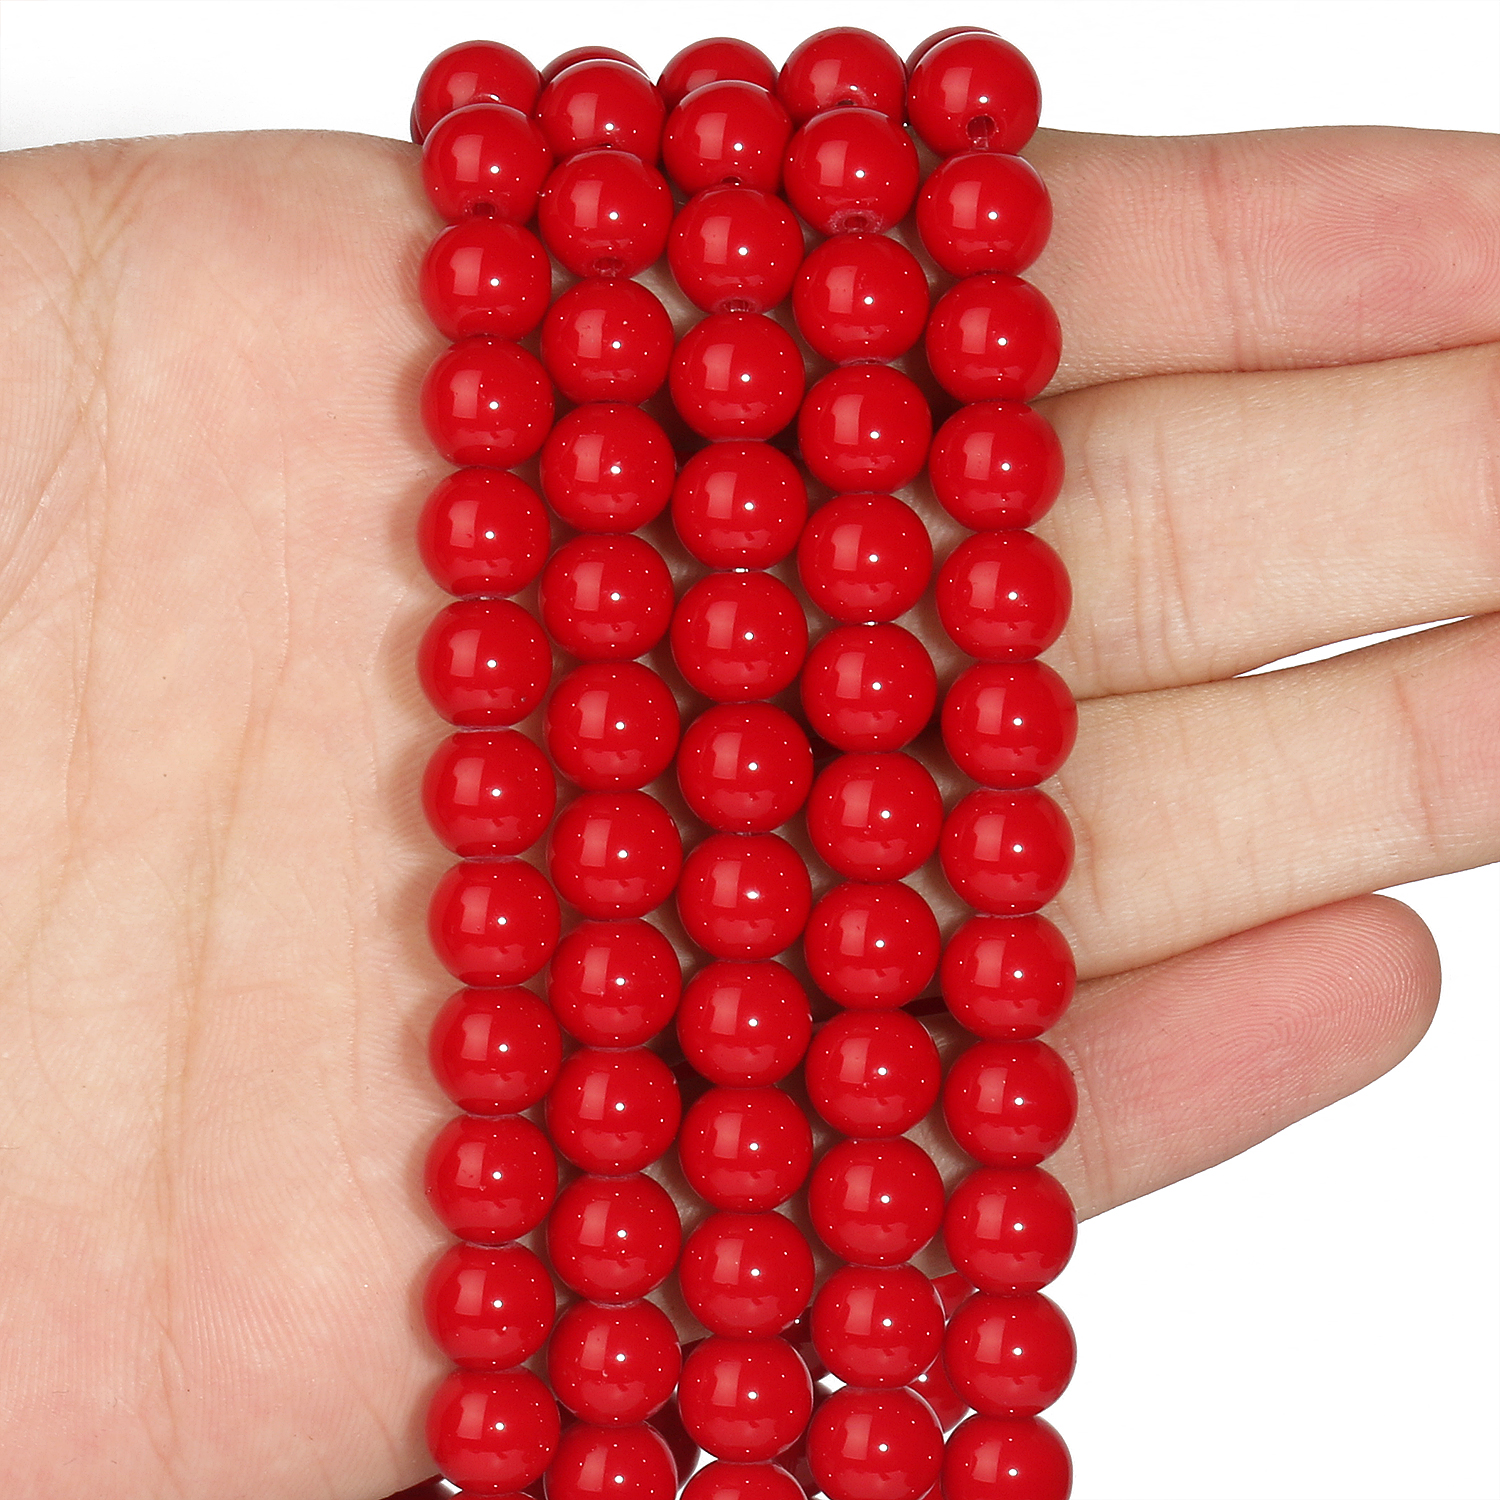 8mm Red Beads for Jewelry Making,Natural Stone Beads for Bracelets Making,Striated Stone Round Loose Gemstone Beads for Jewelry Making Adults,46pcs